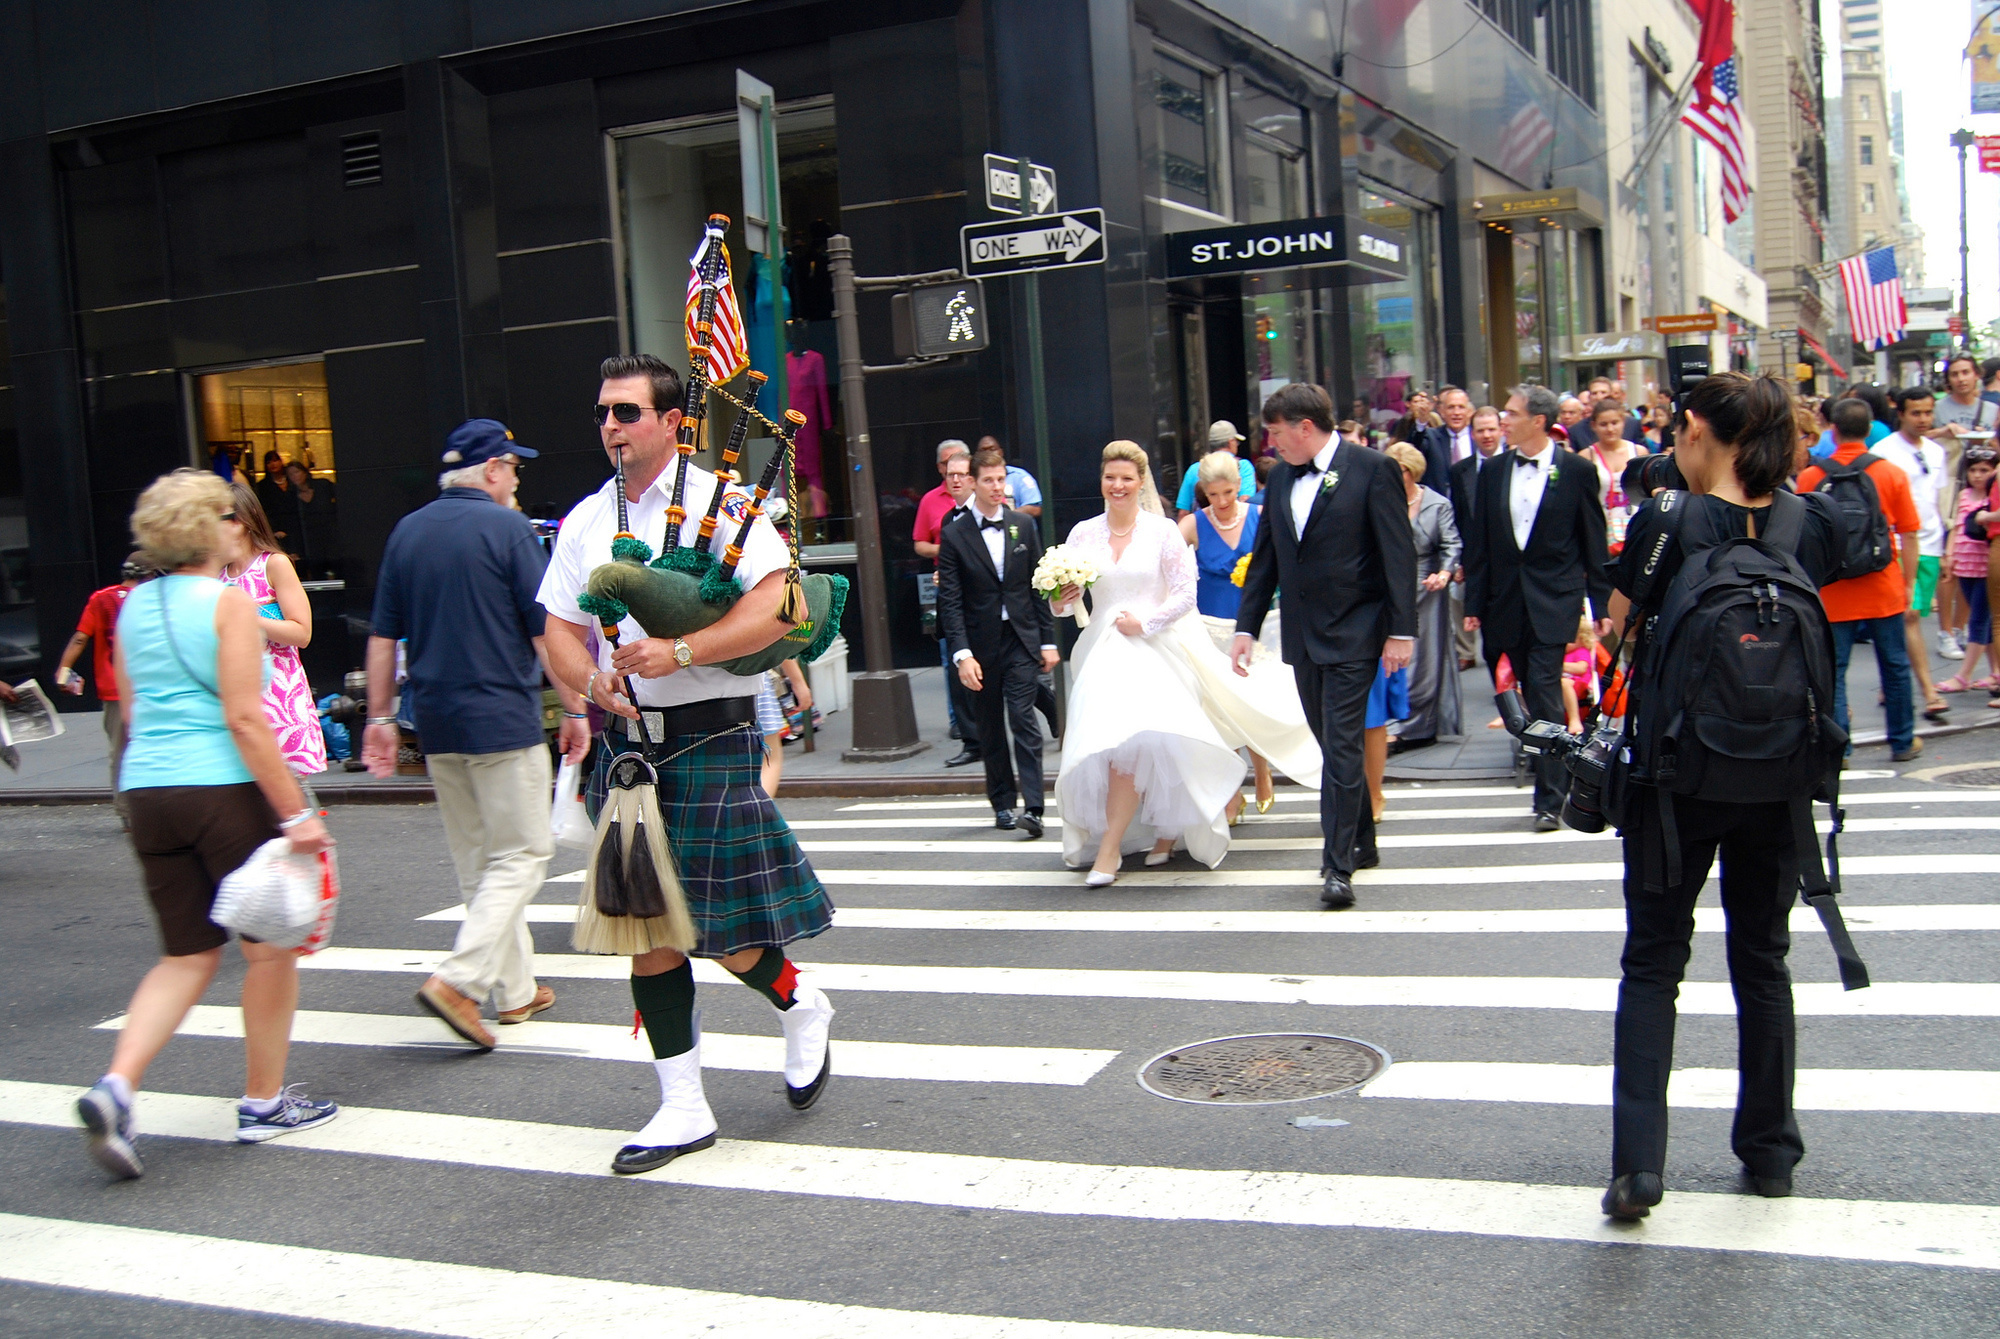 Getting married in Manhattan will cost you an average of $80,000. It's the highest cost of the average wedding in the United States.